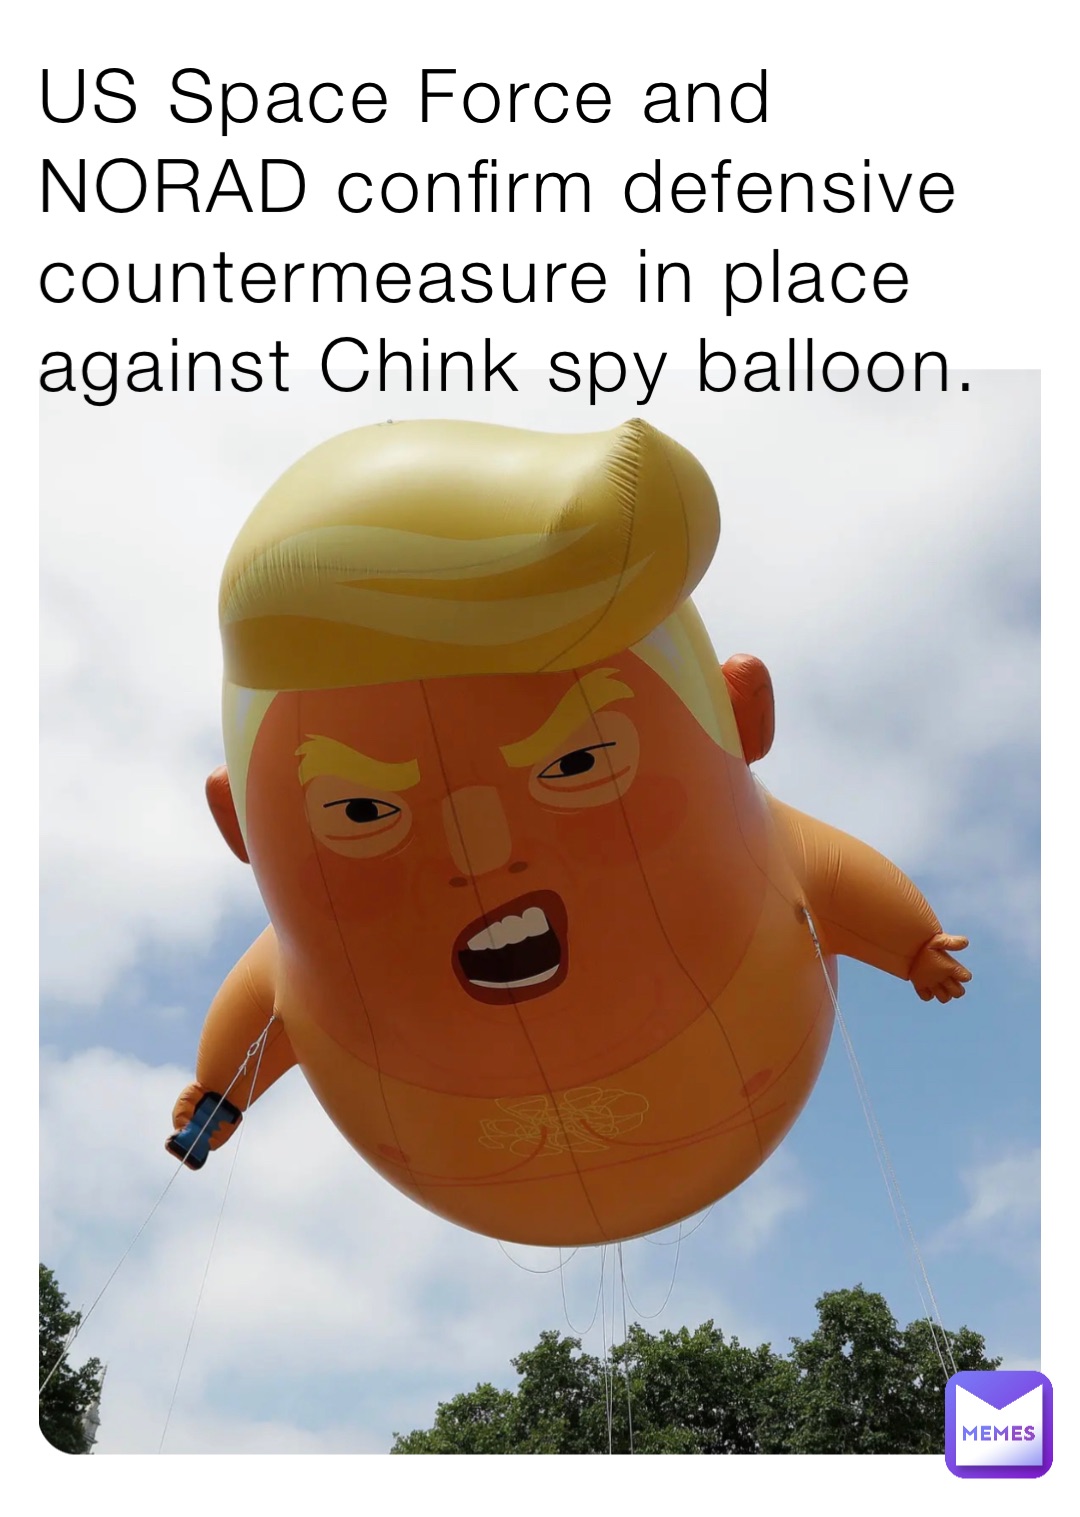 US Space Force and NORAD confirm defensive countermeasure in place against Chink spy balloon.